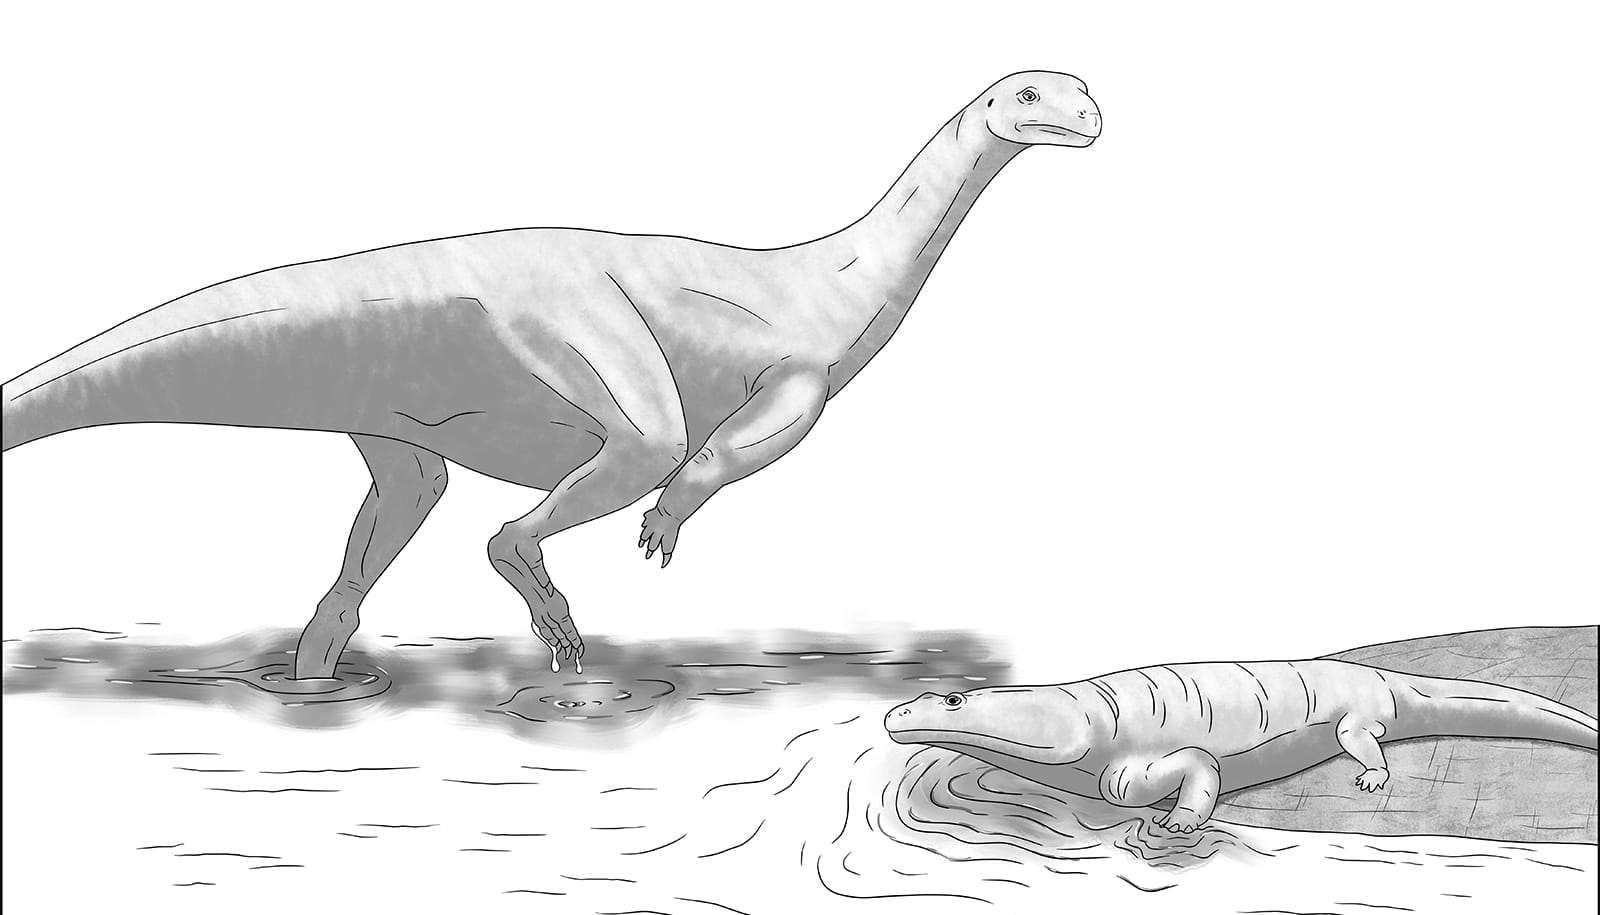 An artist's illustration shows the new dinosaur species having a long neck, two powerful hind legs, and small arms.